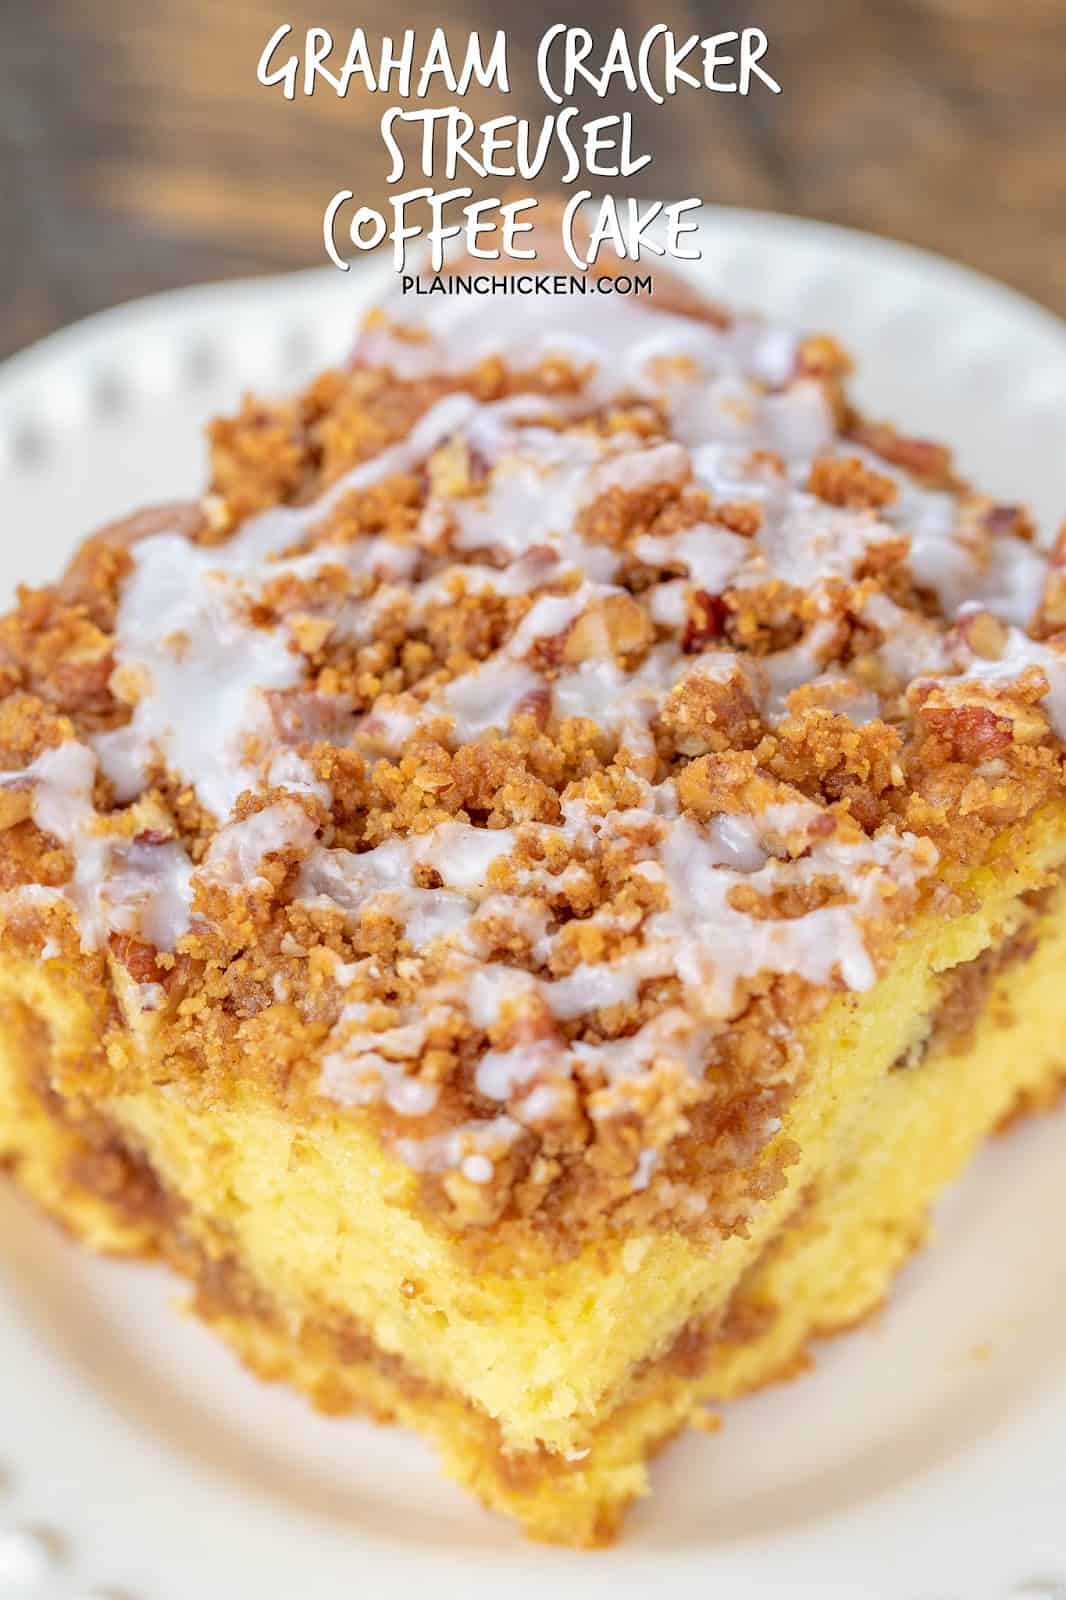 Graham Cracker Streusel Coffee Cake - seriously delicious! SO moist and the streusel topping is to die for! We couldn't resist this yummy cake!! Cake mix, vanilla pudding, sour cream, oil, eggs, vanilla, cinnamon, graham cracker crumbs, brown sugar, pecans and butter. Great for potlucks, tailgating, breakfast, brunch and dessert. #breakfast #cake #dessert #coffeecake